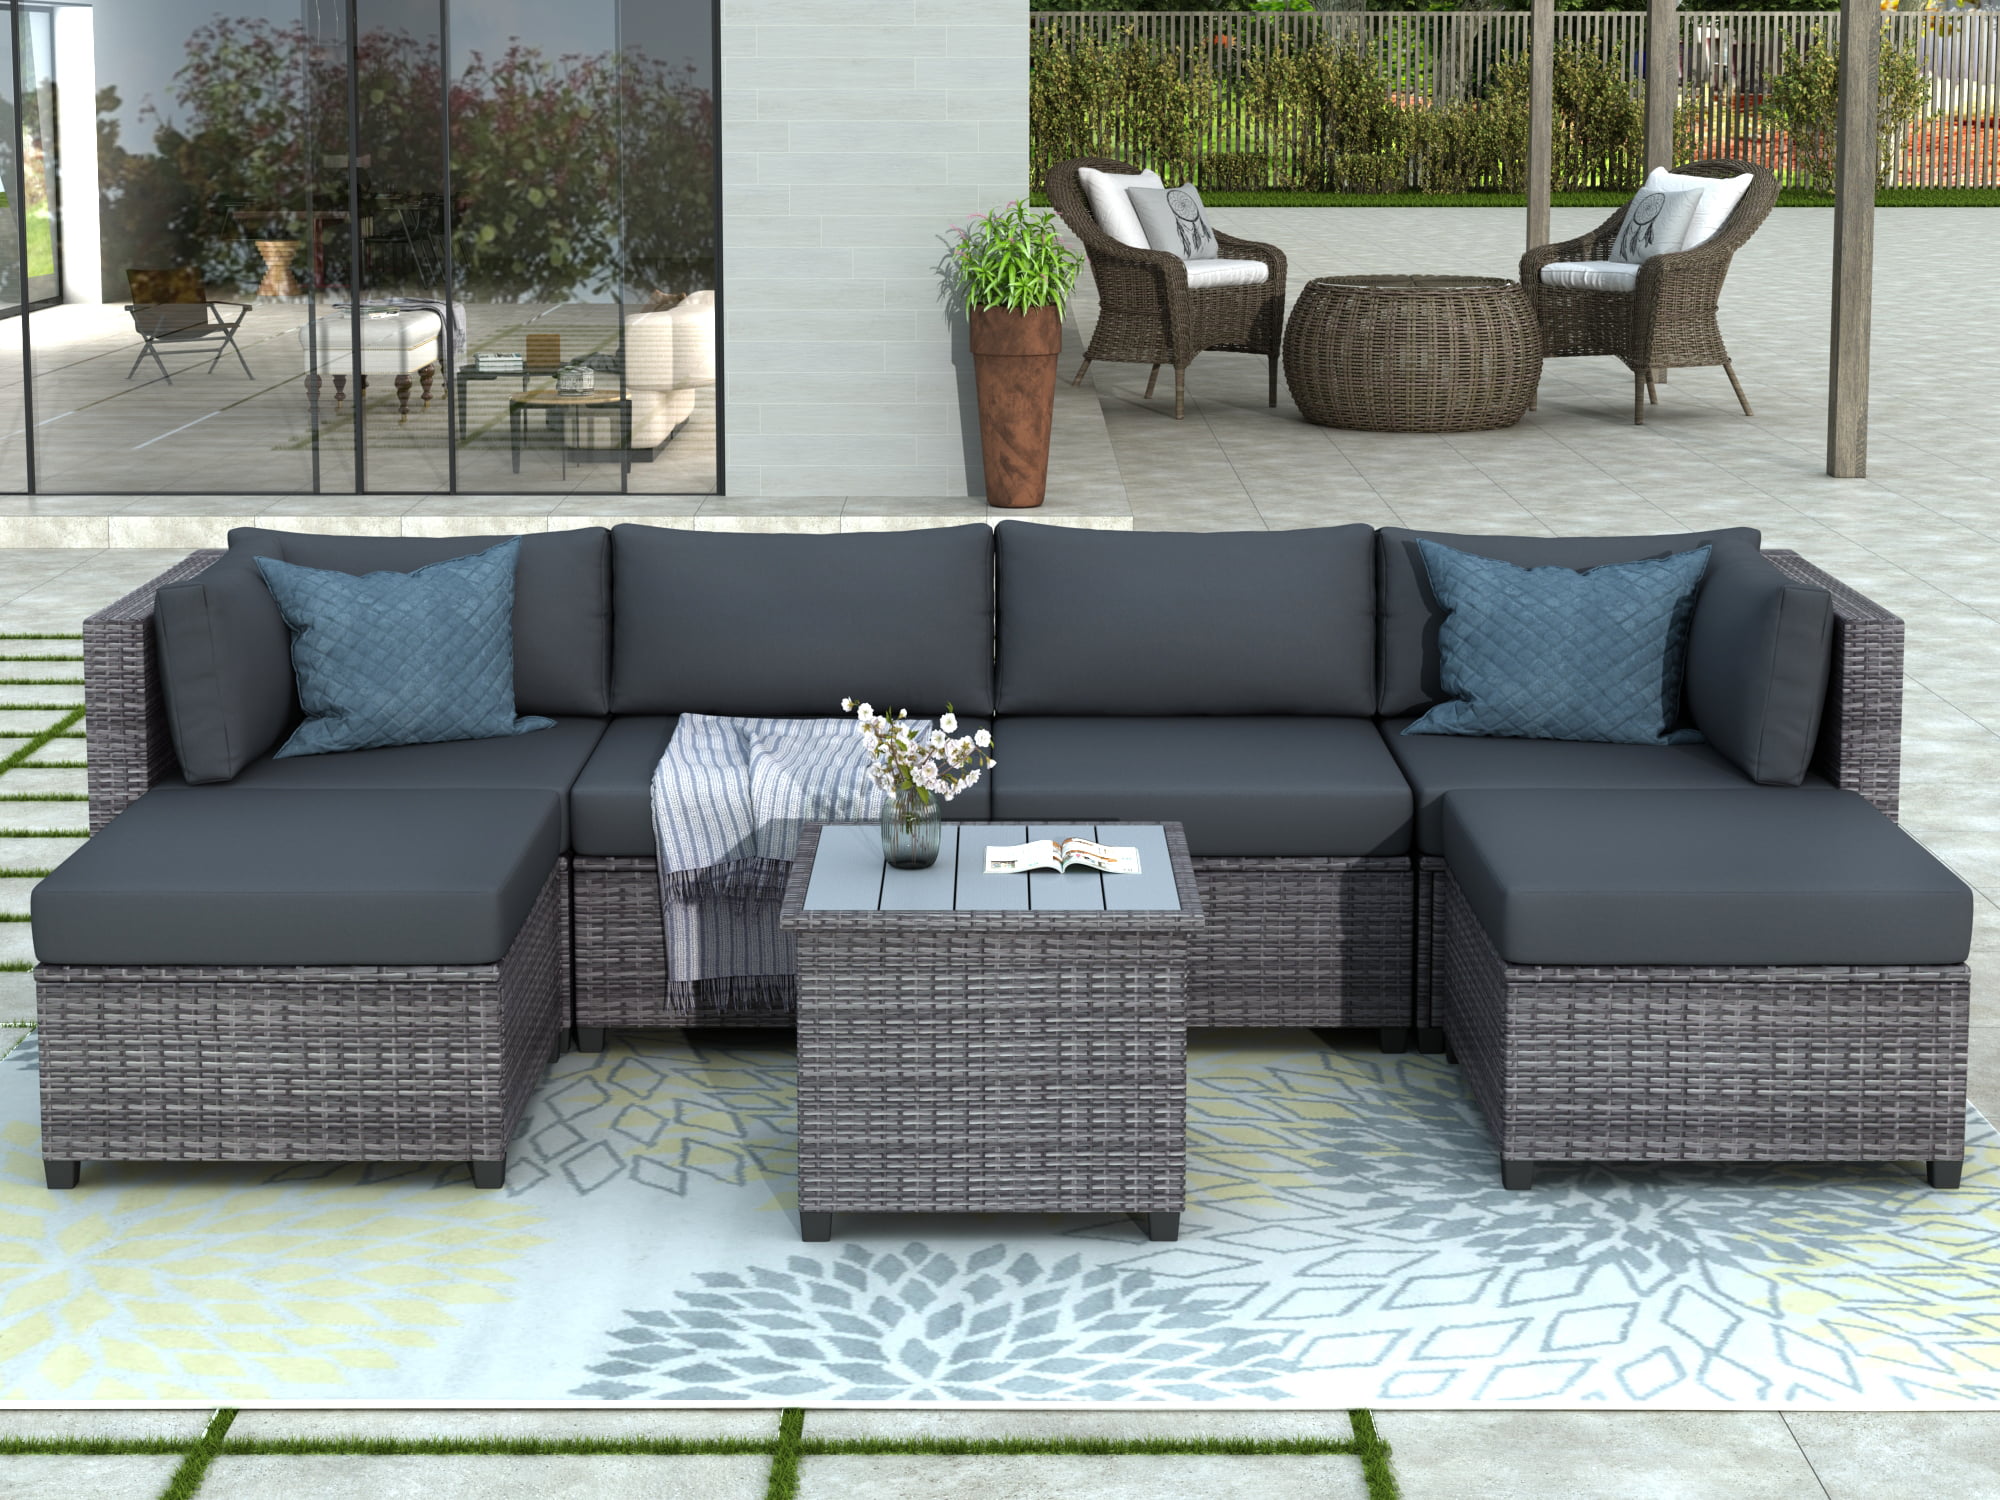 Outdoor Patio Deck Sectional Sofa Sets, SEGMART Newest 7 Pieces Wicker Furniture Set with Seat Cushions &amp; Polywood Table, Conversation Sets with 2 Ottomans for Porch, Backyard, S1462